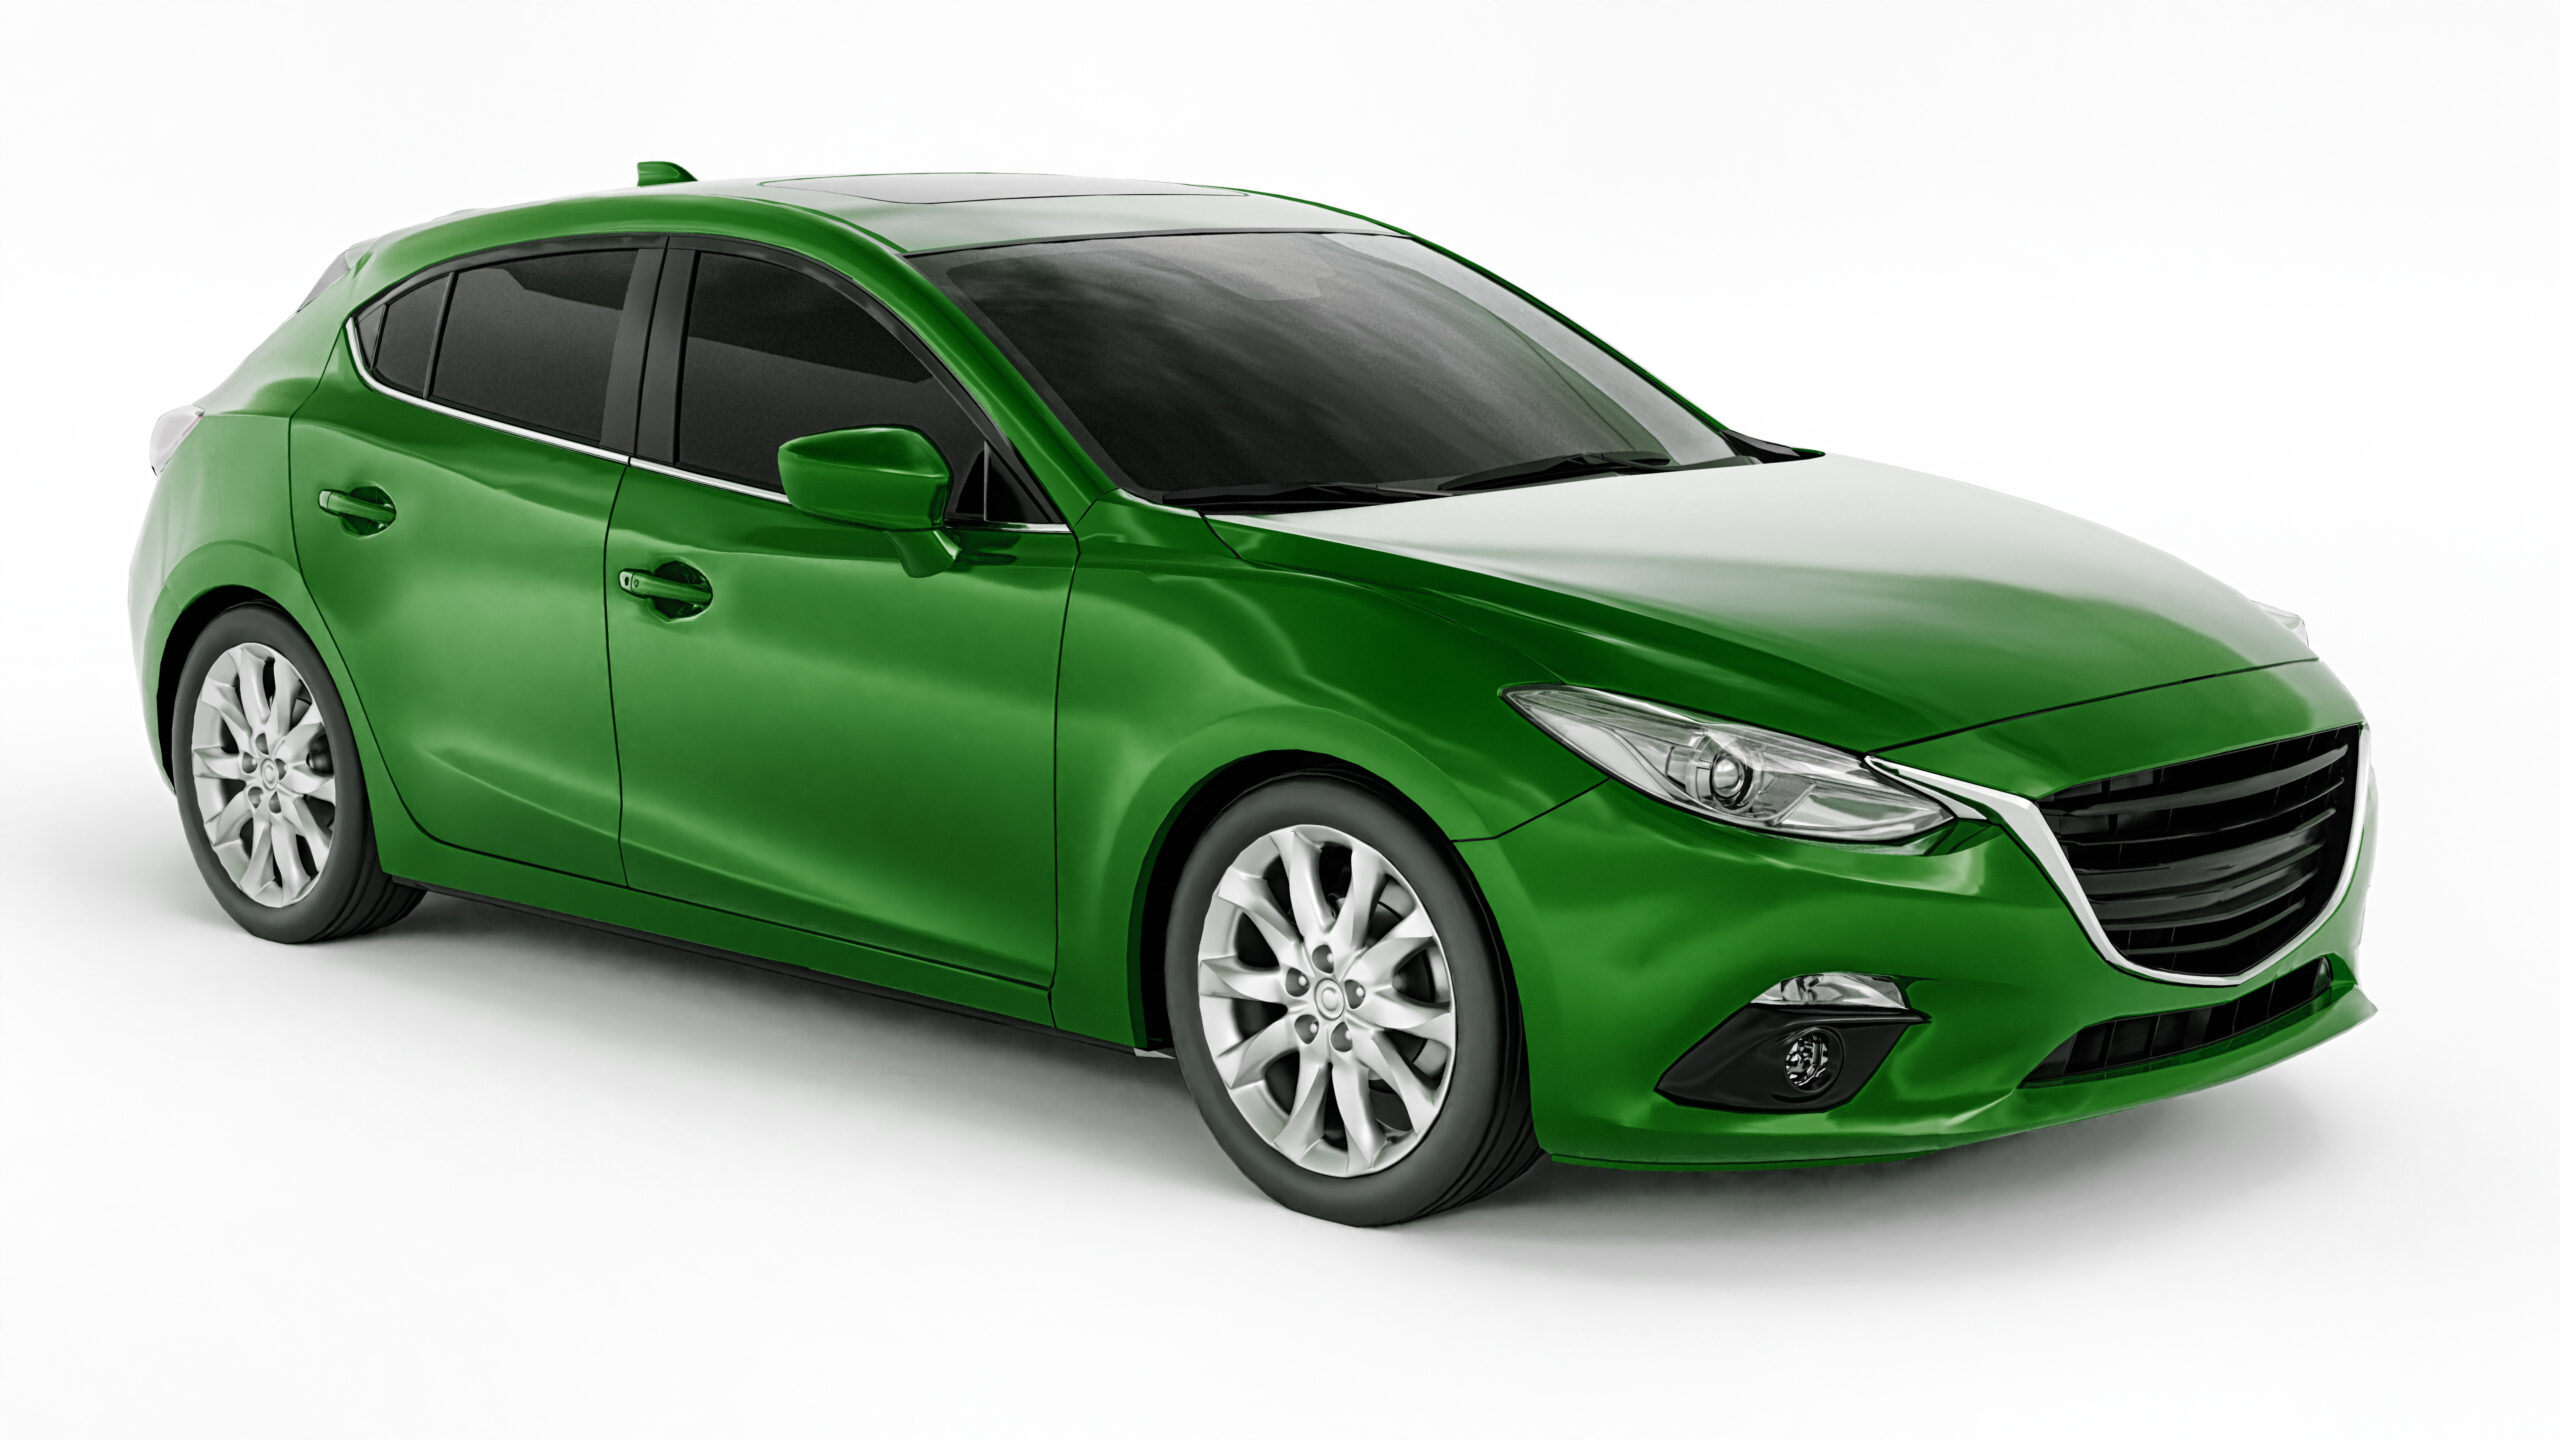 Green city car with blank surface for your creative design. 3D illustration